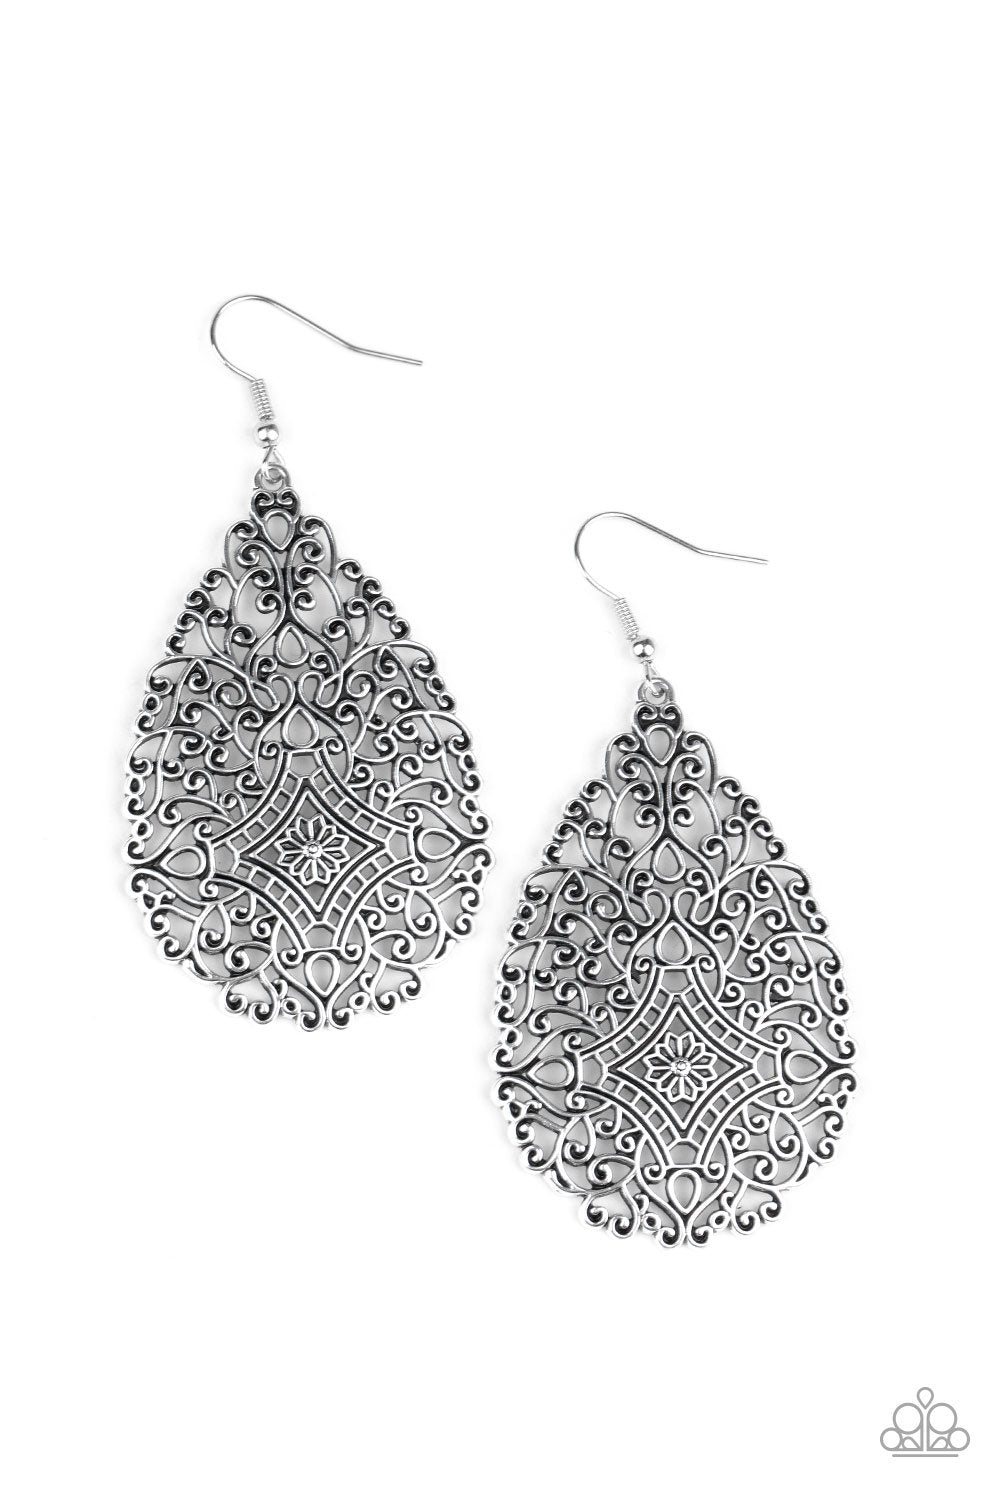 Napa Valley Vintage Silver Filigree Teardrop Earrings - Paparazzi Accessories - lightbox -CarasShop.com - $5 Jewelry by Cara Jewels